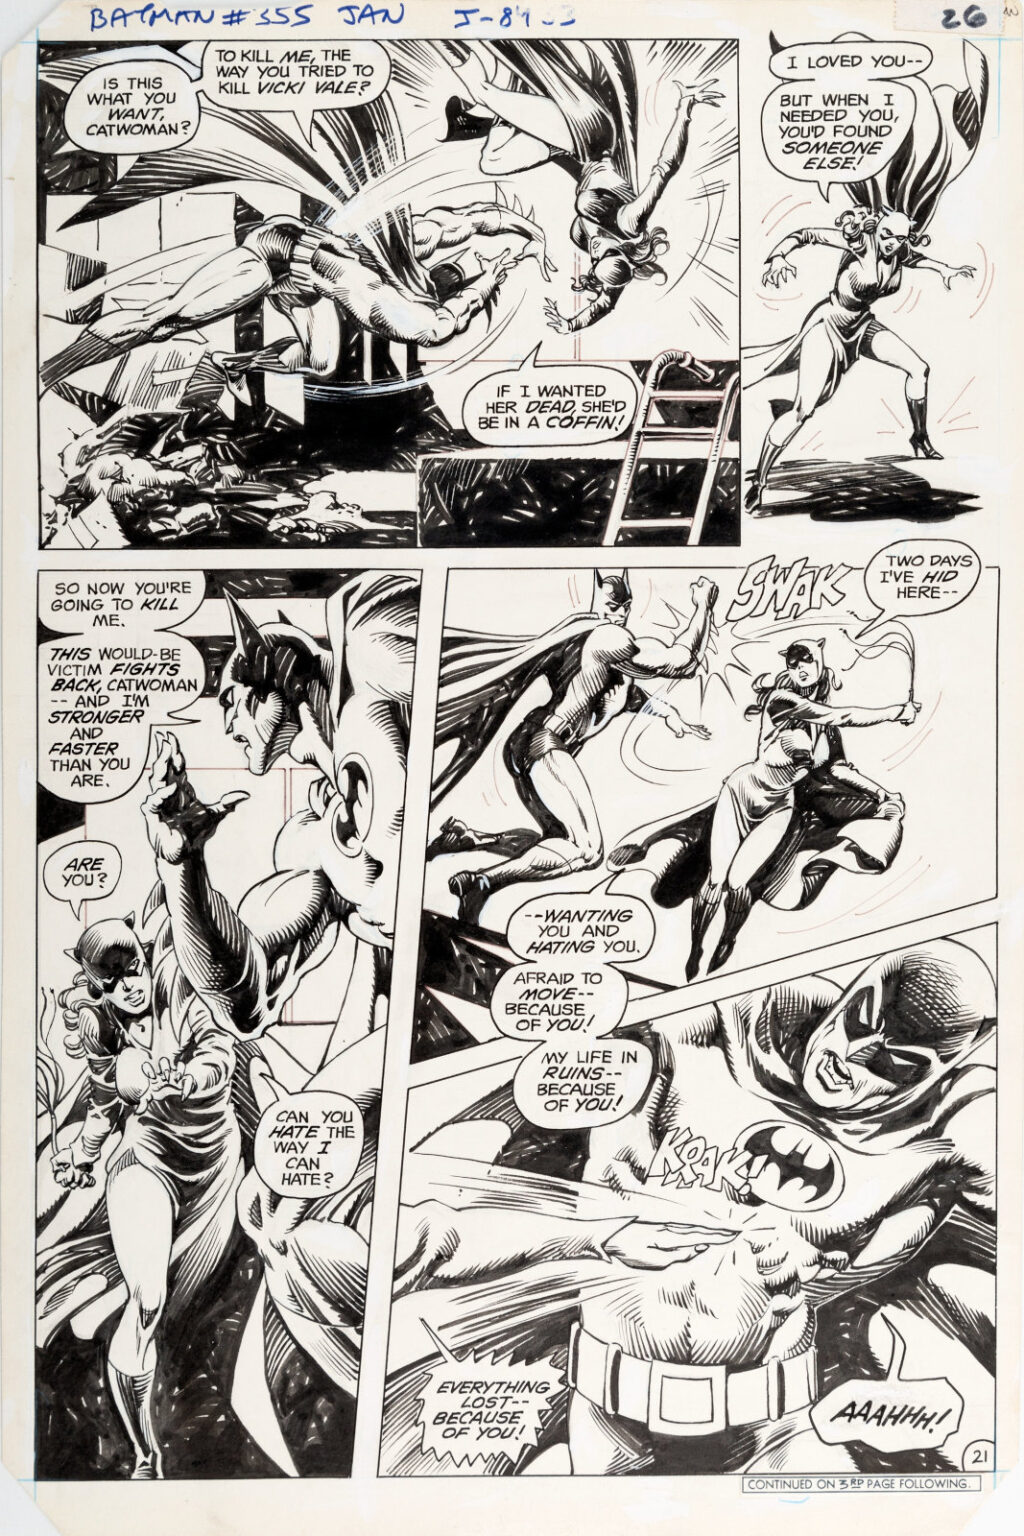 Batman issue 355 page 21 by Don Newton and Alfredo Alcala